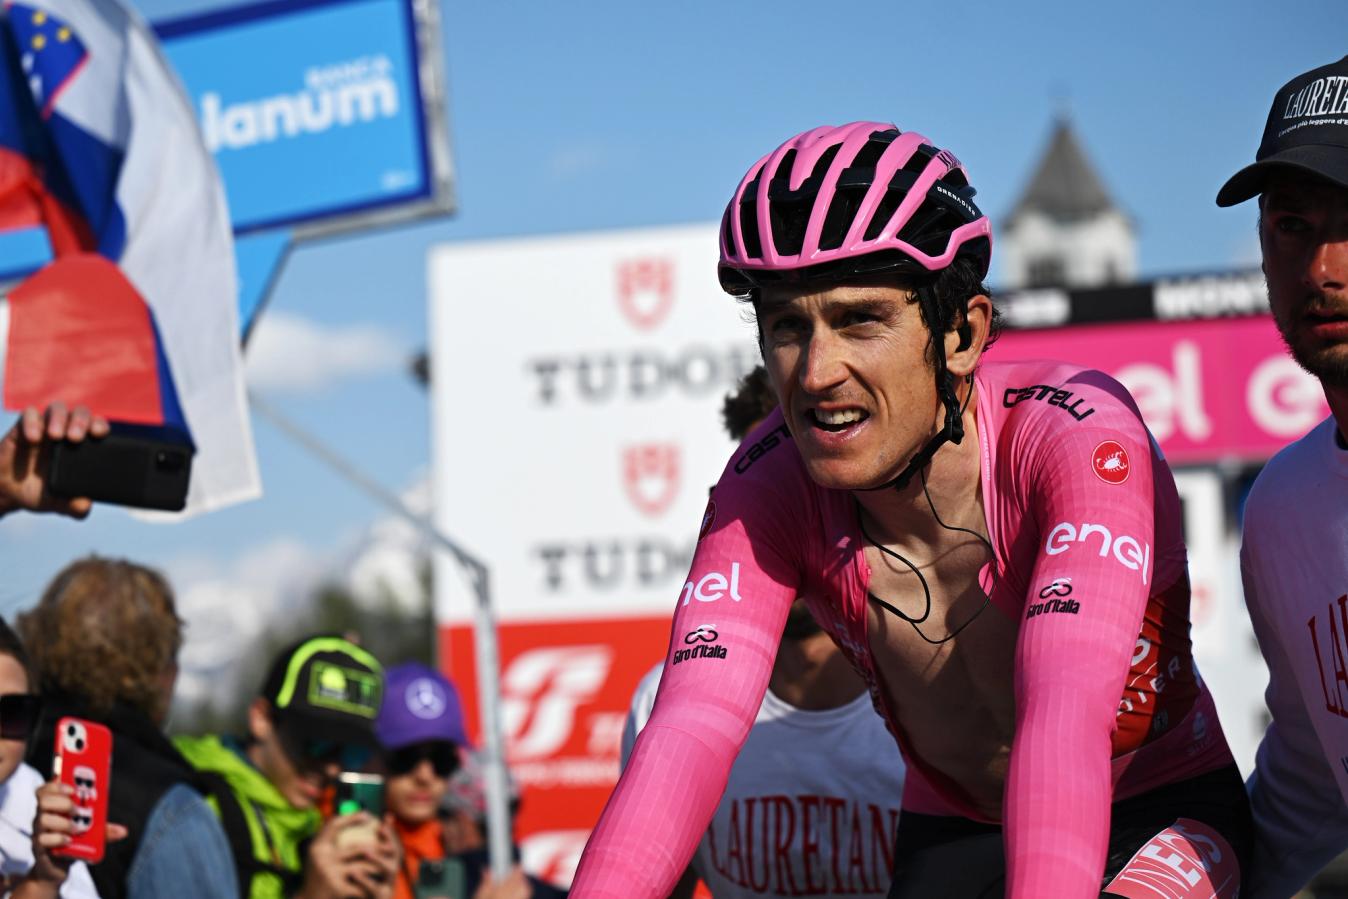 Can Geraint Thomas rebound from last year's Giro d'Italia disappointment and win a second Grand Tour?